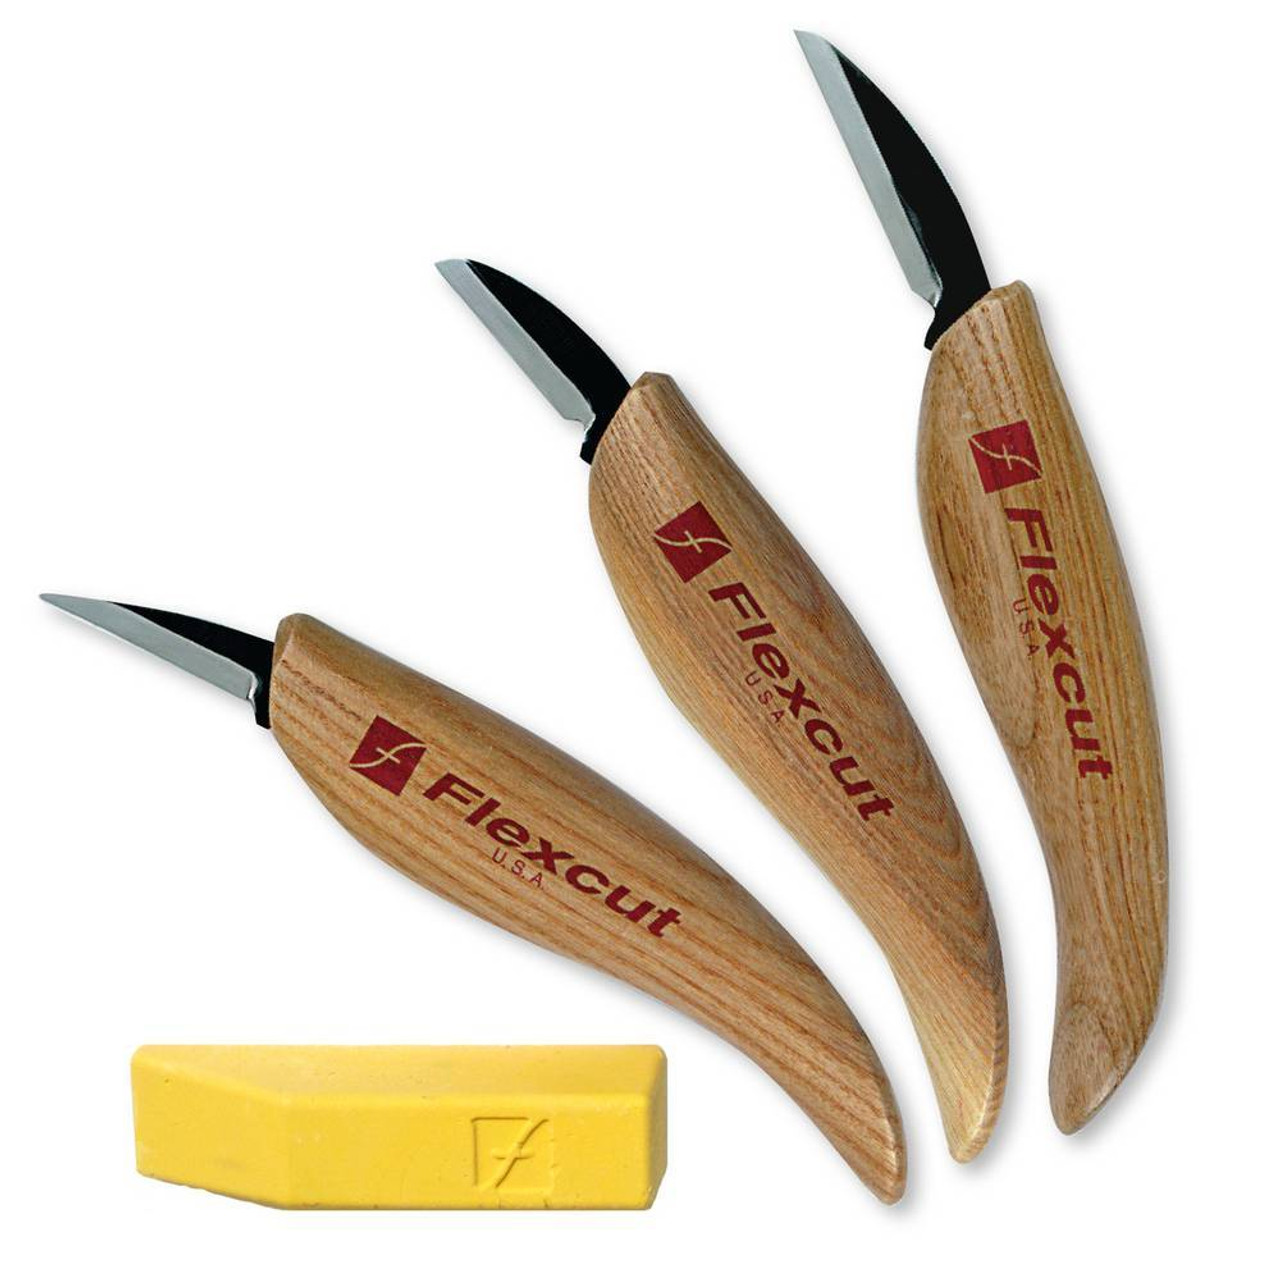 Image of Flexcut 3-Knife Starter Set contains cutting knife with 1  1/4" blade, detail knife with 1  1/2" blade, roughing knife with 1  3/4" blade.